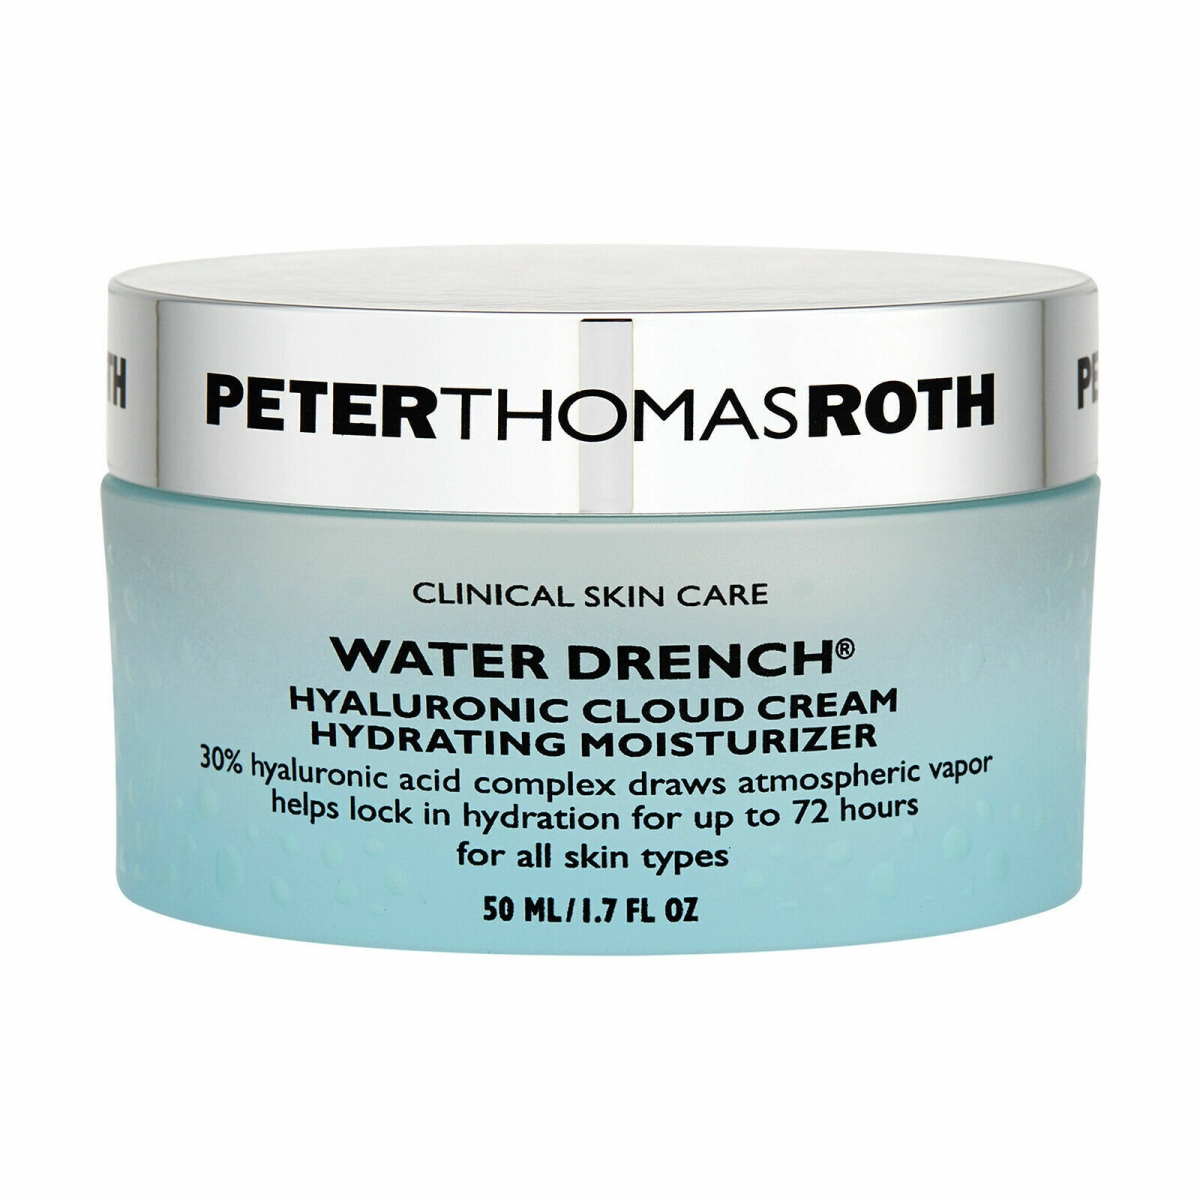 Picture of Keto store CNBH32 Peter Thomas Roth Water Drench Hyaluronic Cloud Cream 1.7 oz.